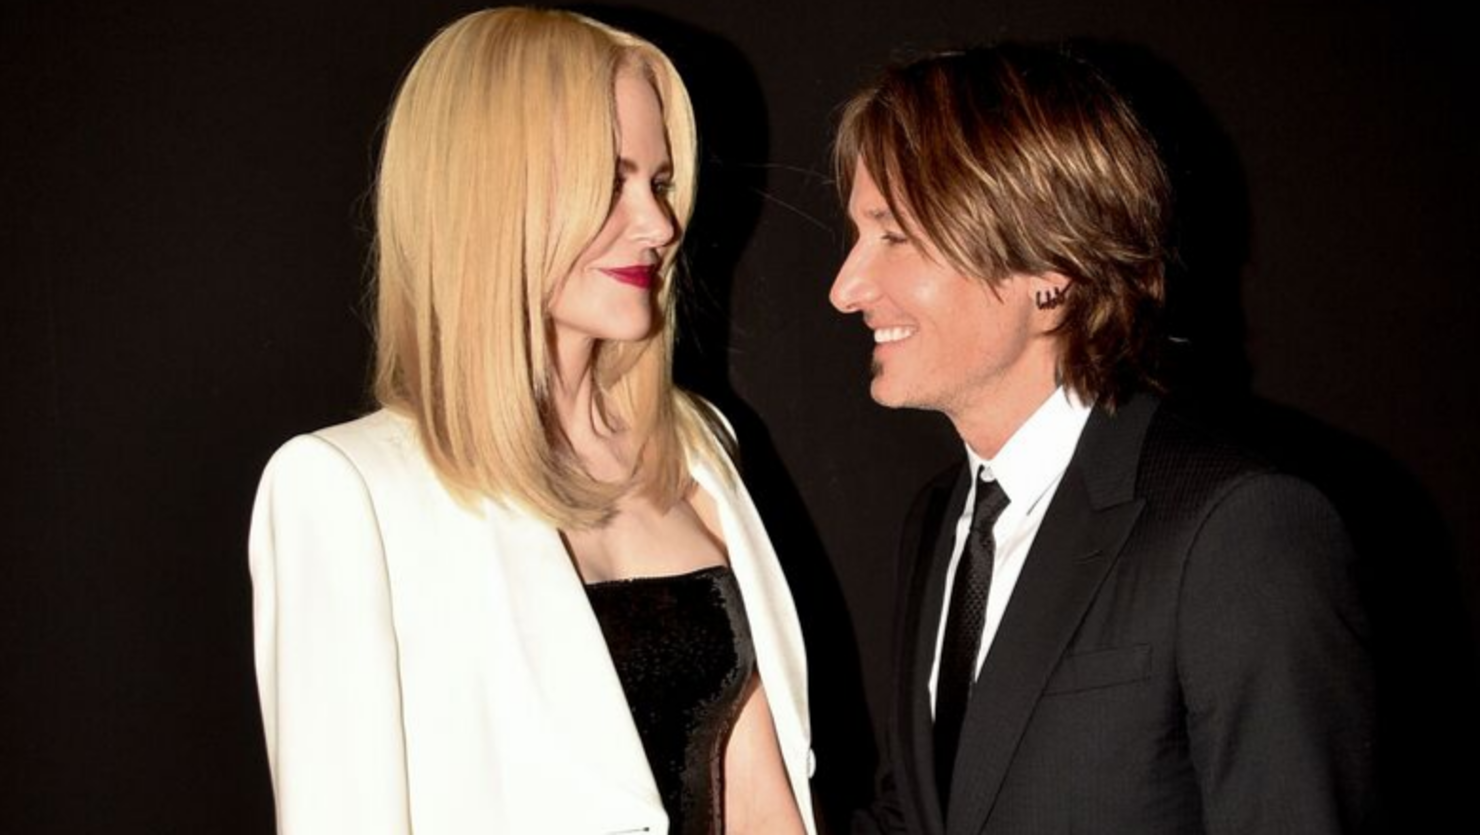 Keith Urban And Nicole Kidman Perform Serenade Together At Wedding In Italy